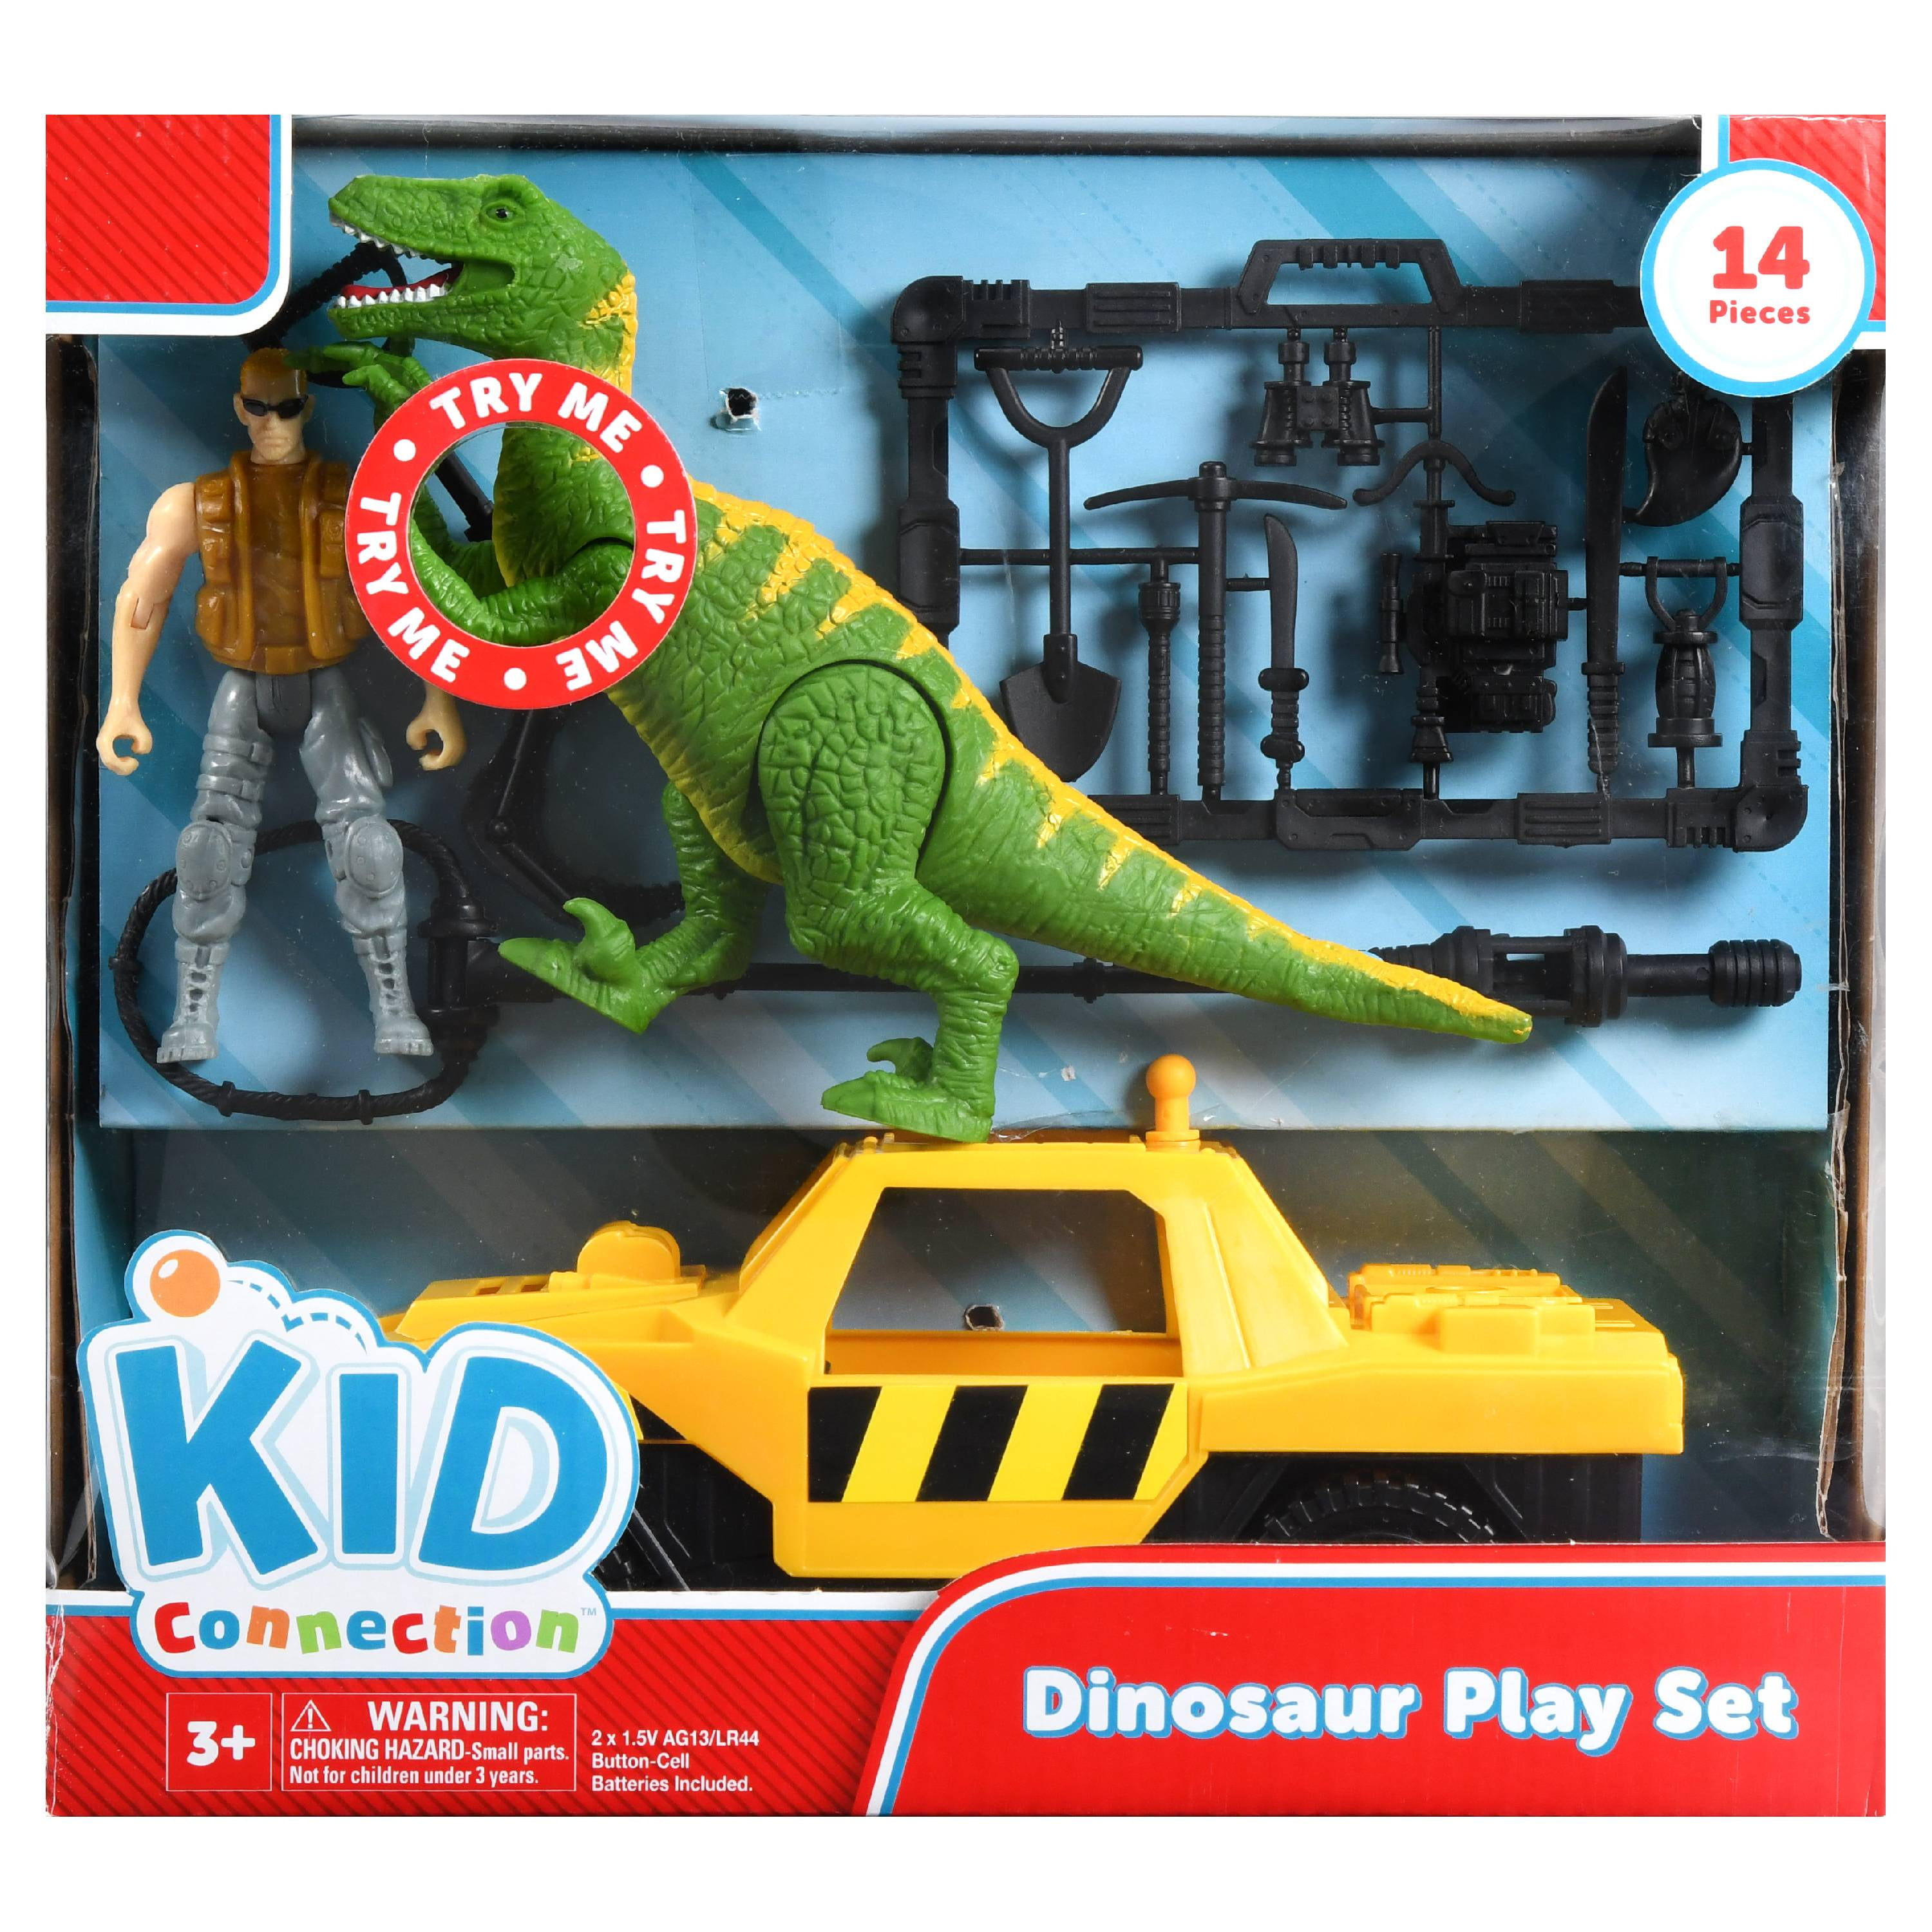 kid connection toys at walmart